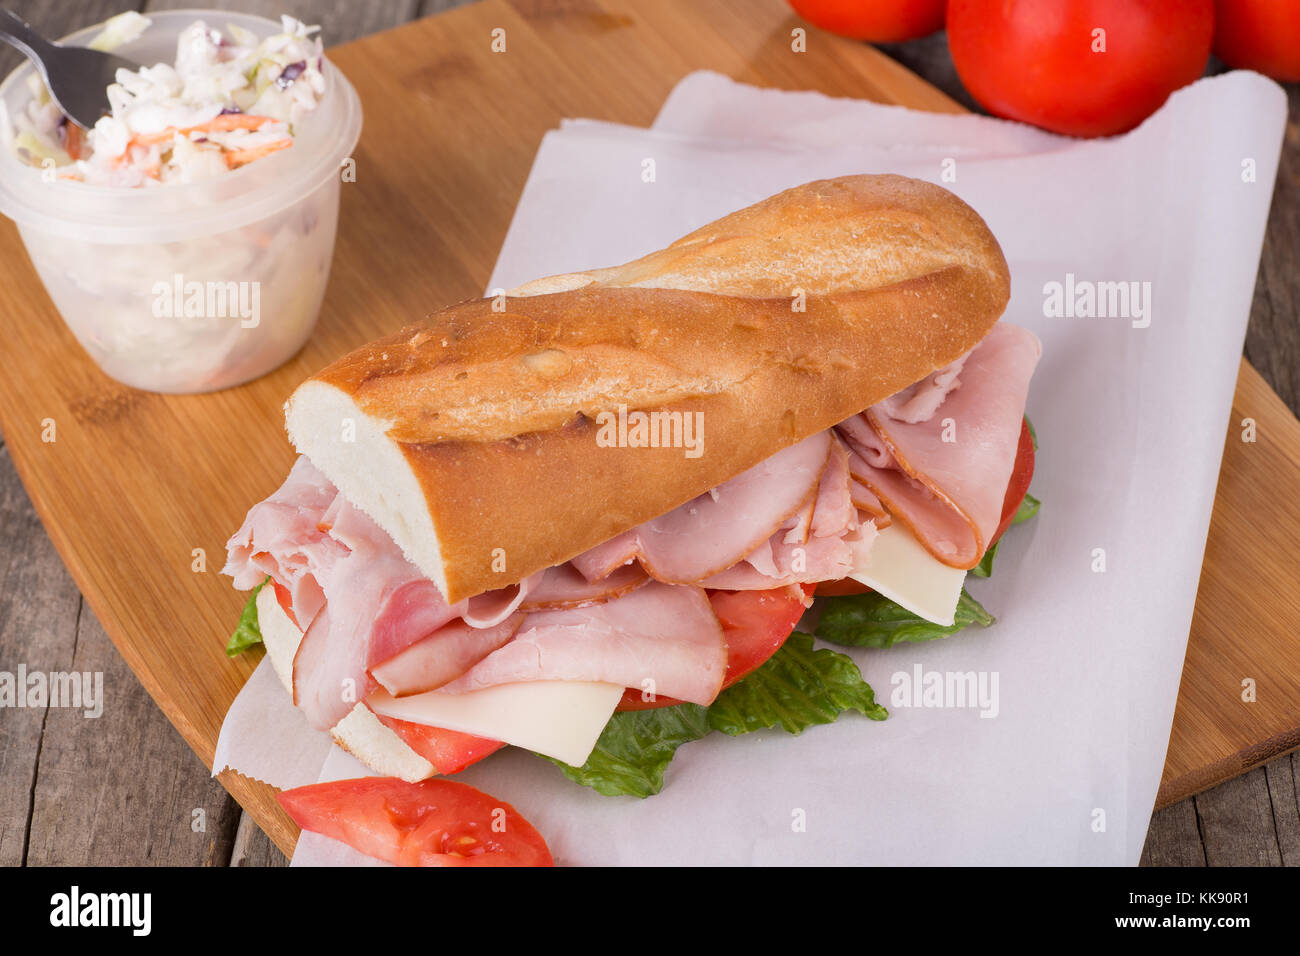 Ham and cheese sandwich with lettuce and tomato Stock Photo